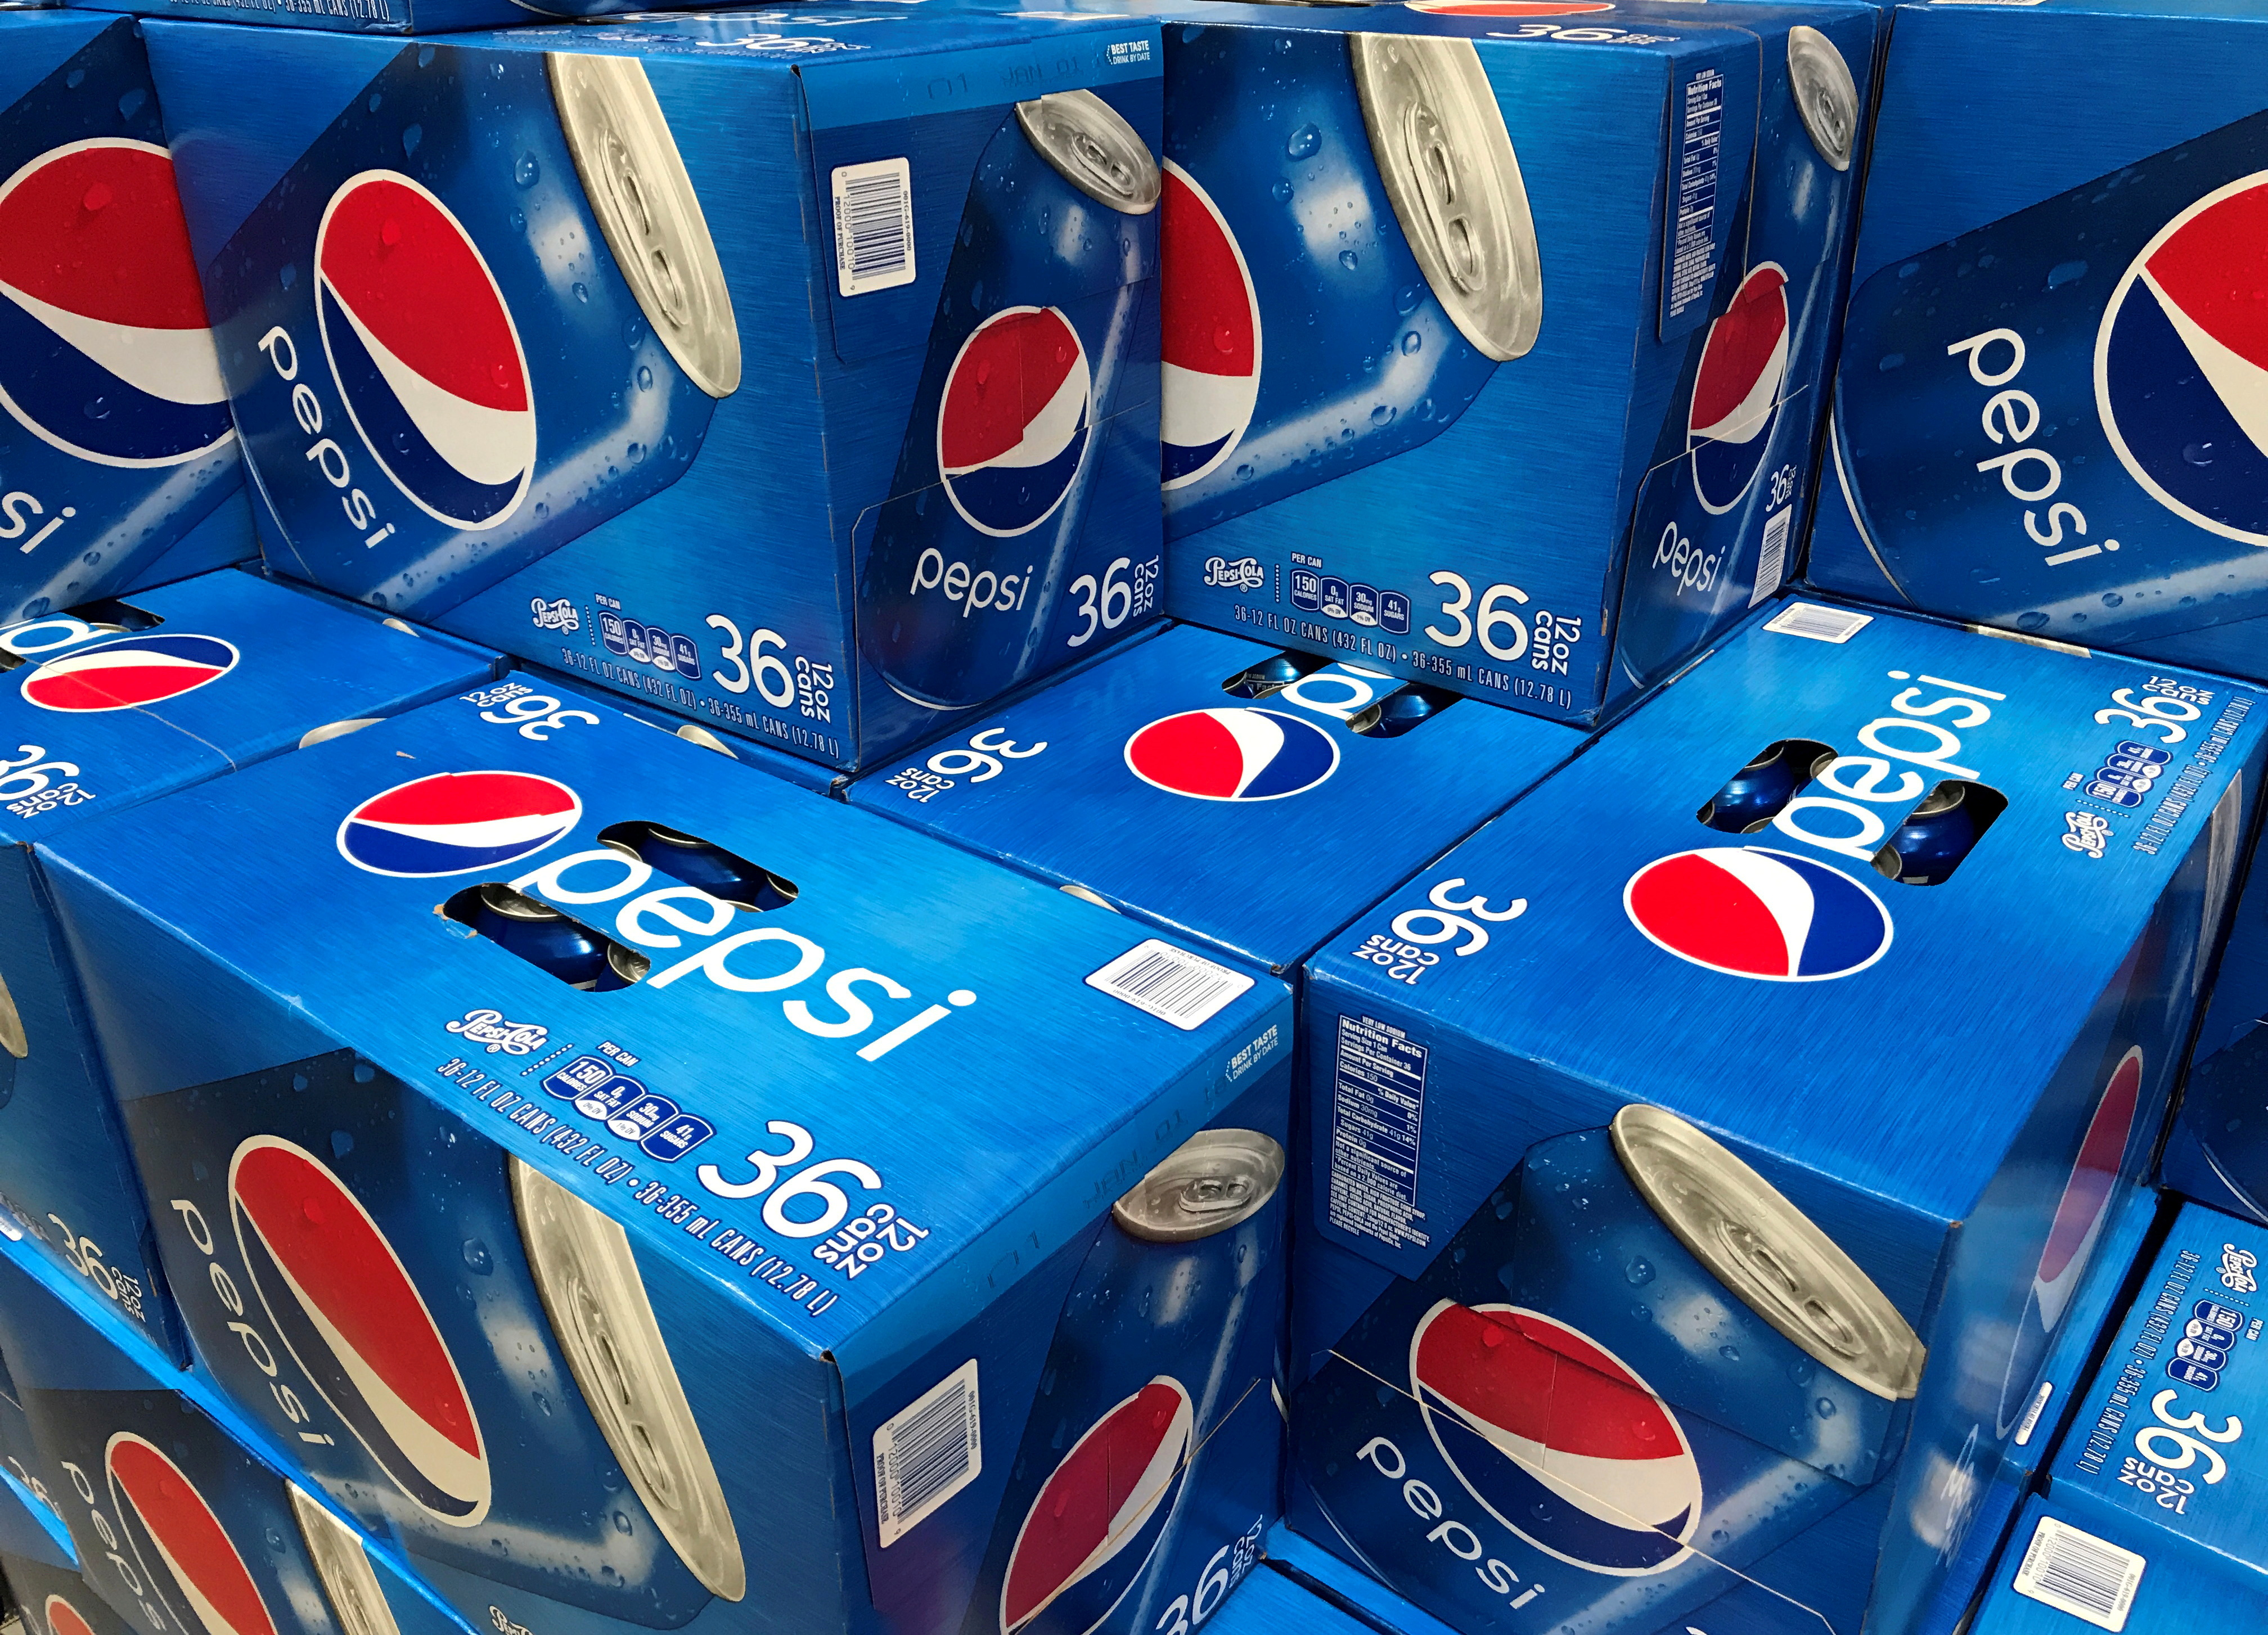 Cases of Pepsi are shown for sale at a store in Carlsbad